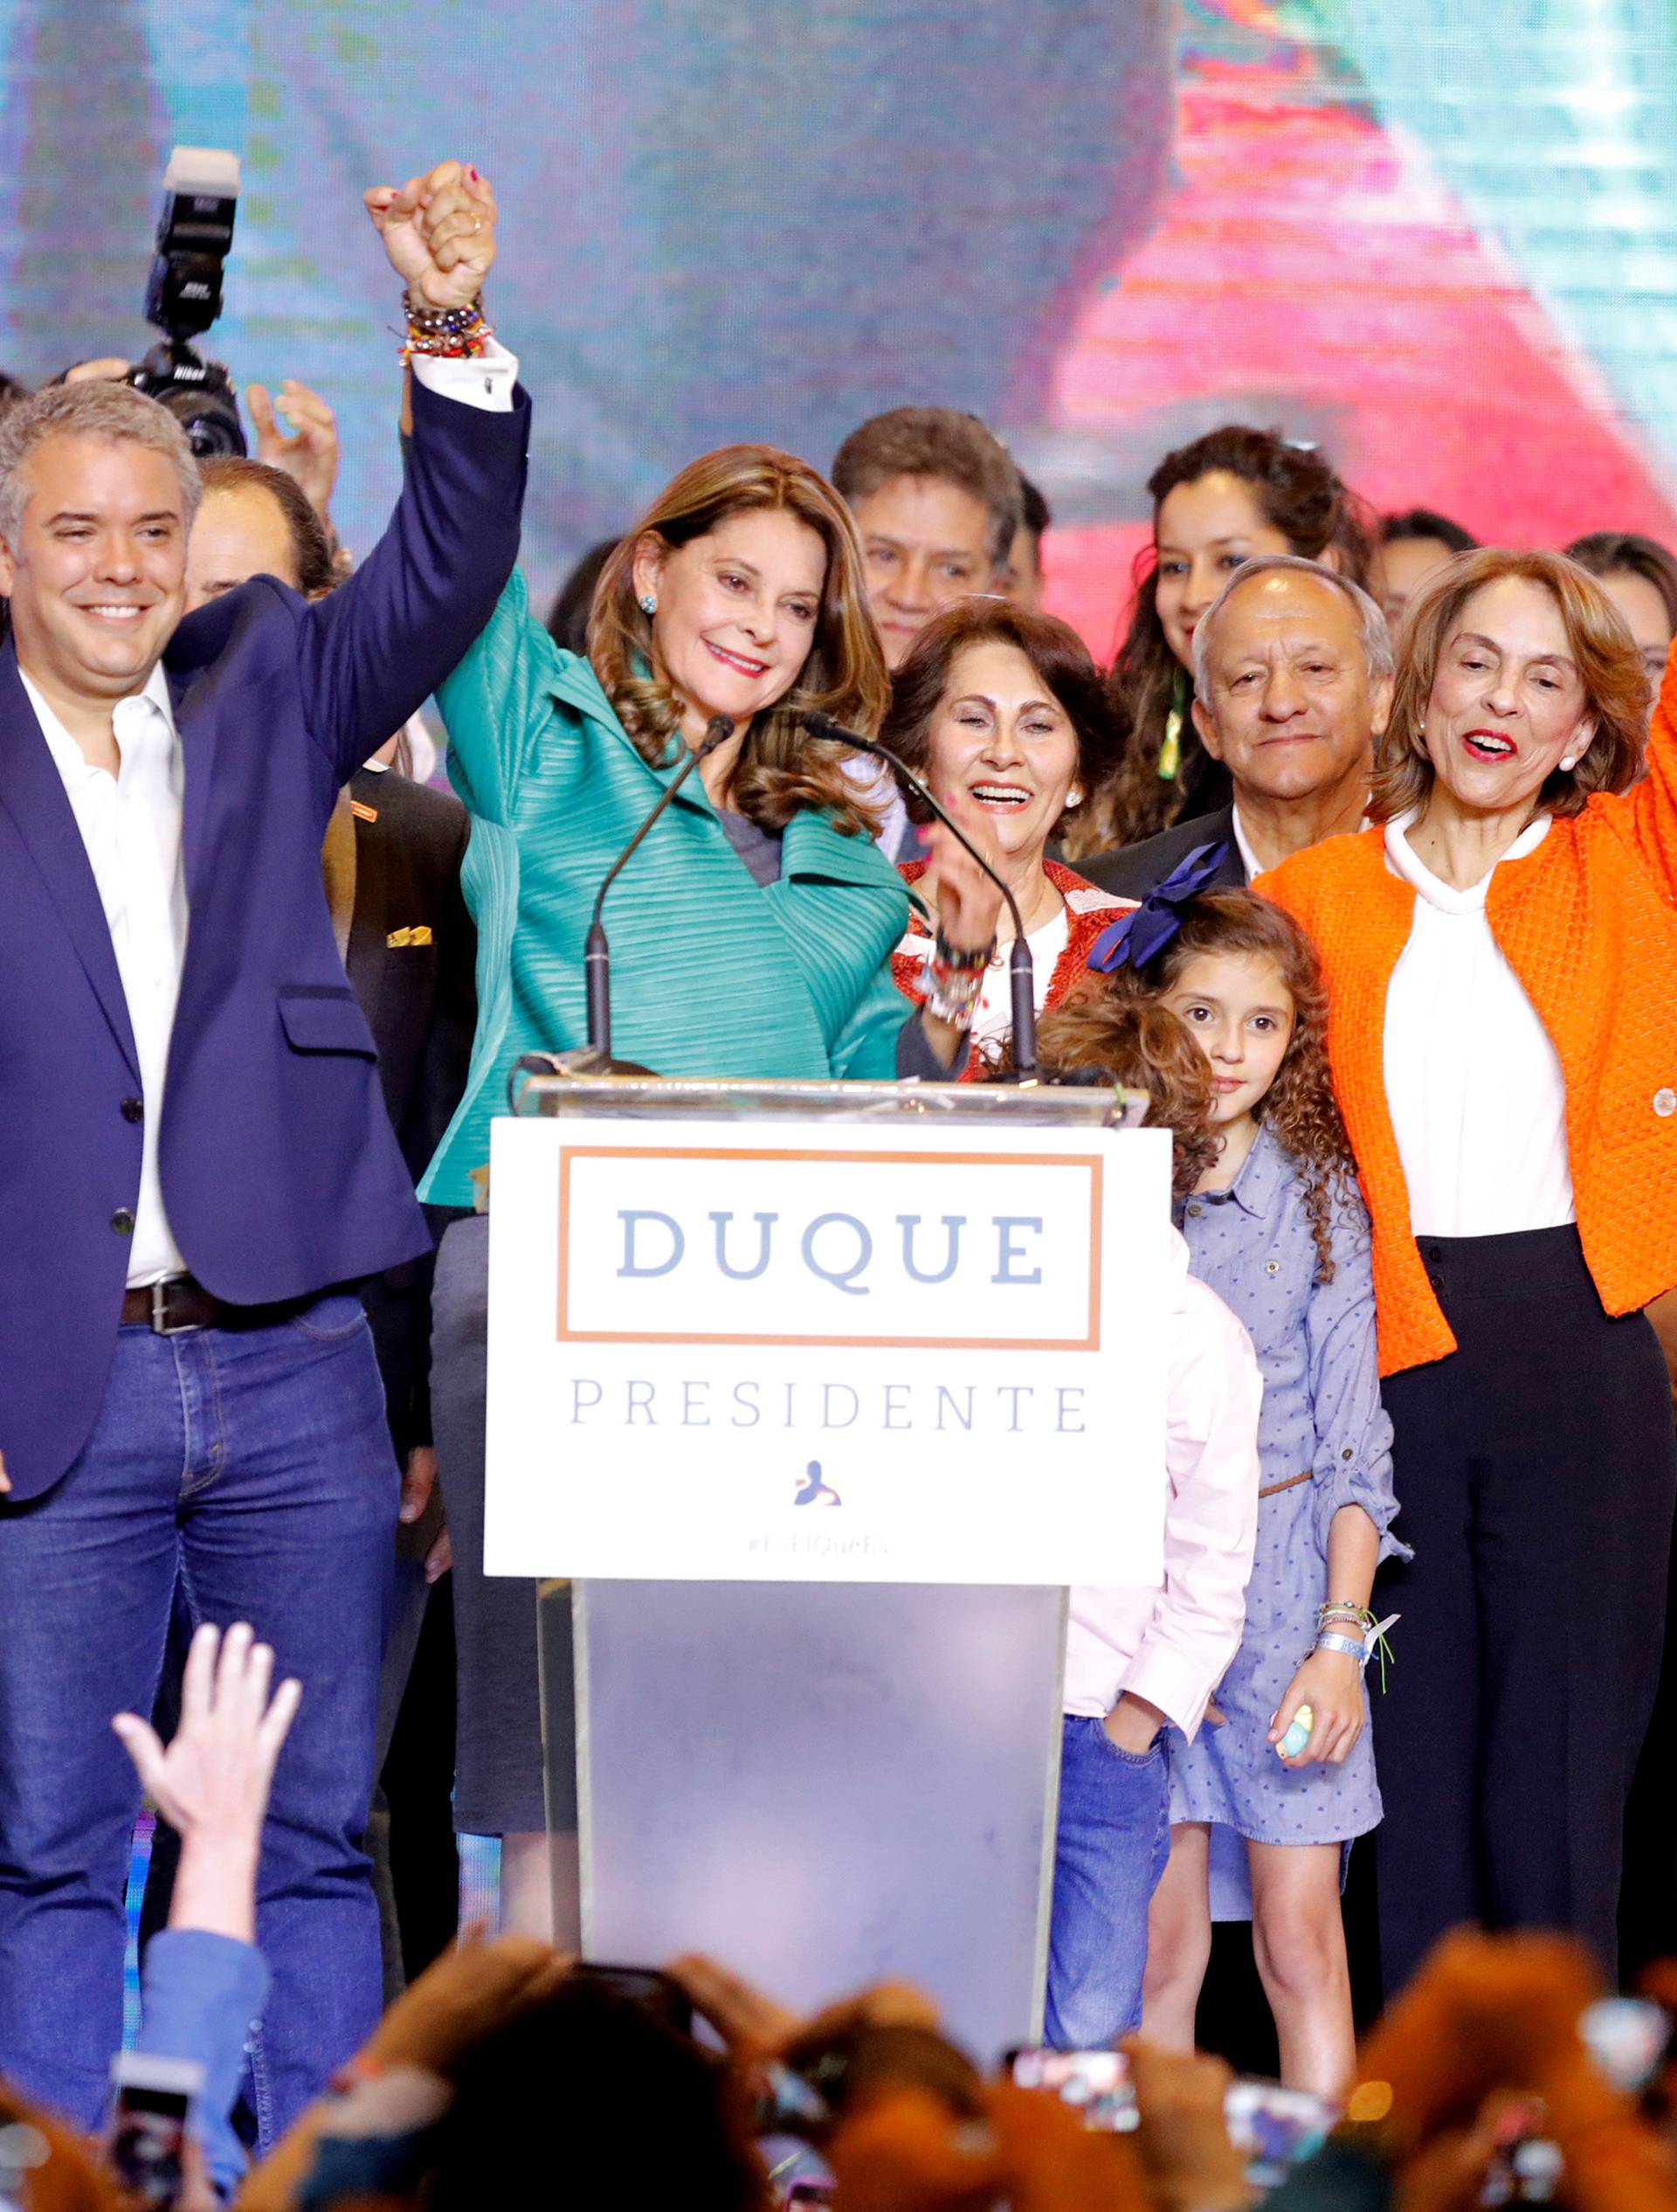 Presidential candidate Duque celebrates with his candidate for Vice President Ramirez after he won the presidential election in Bogota